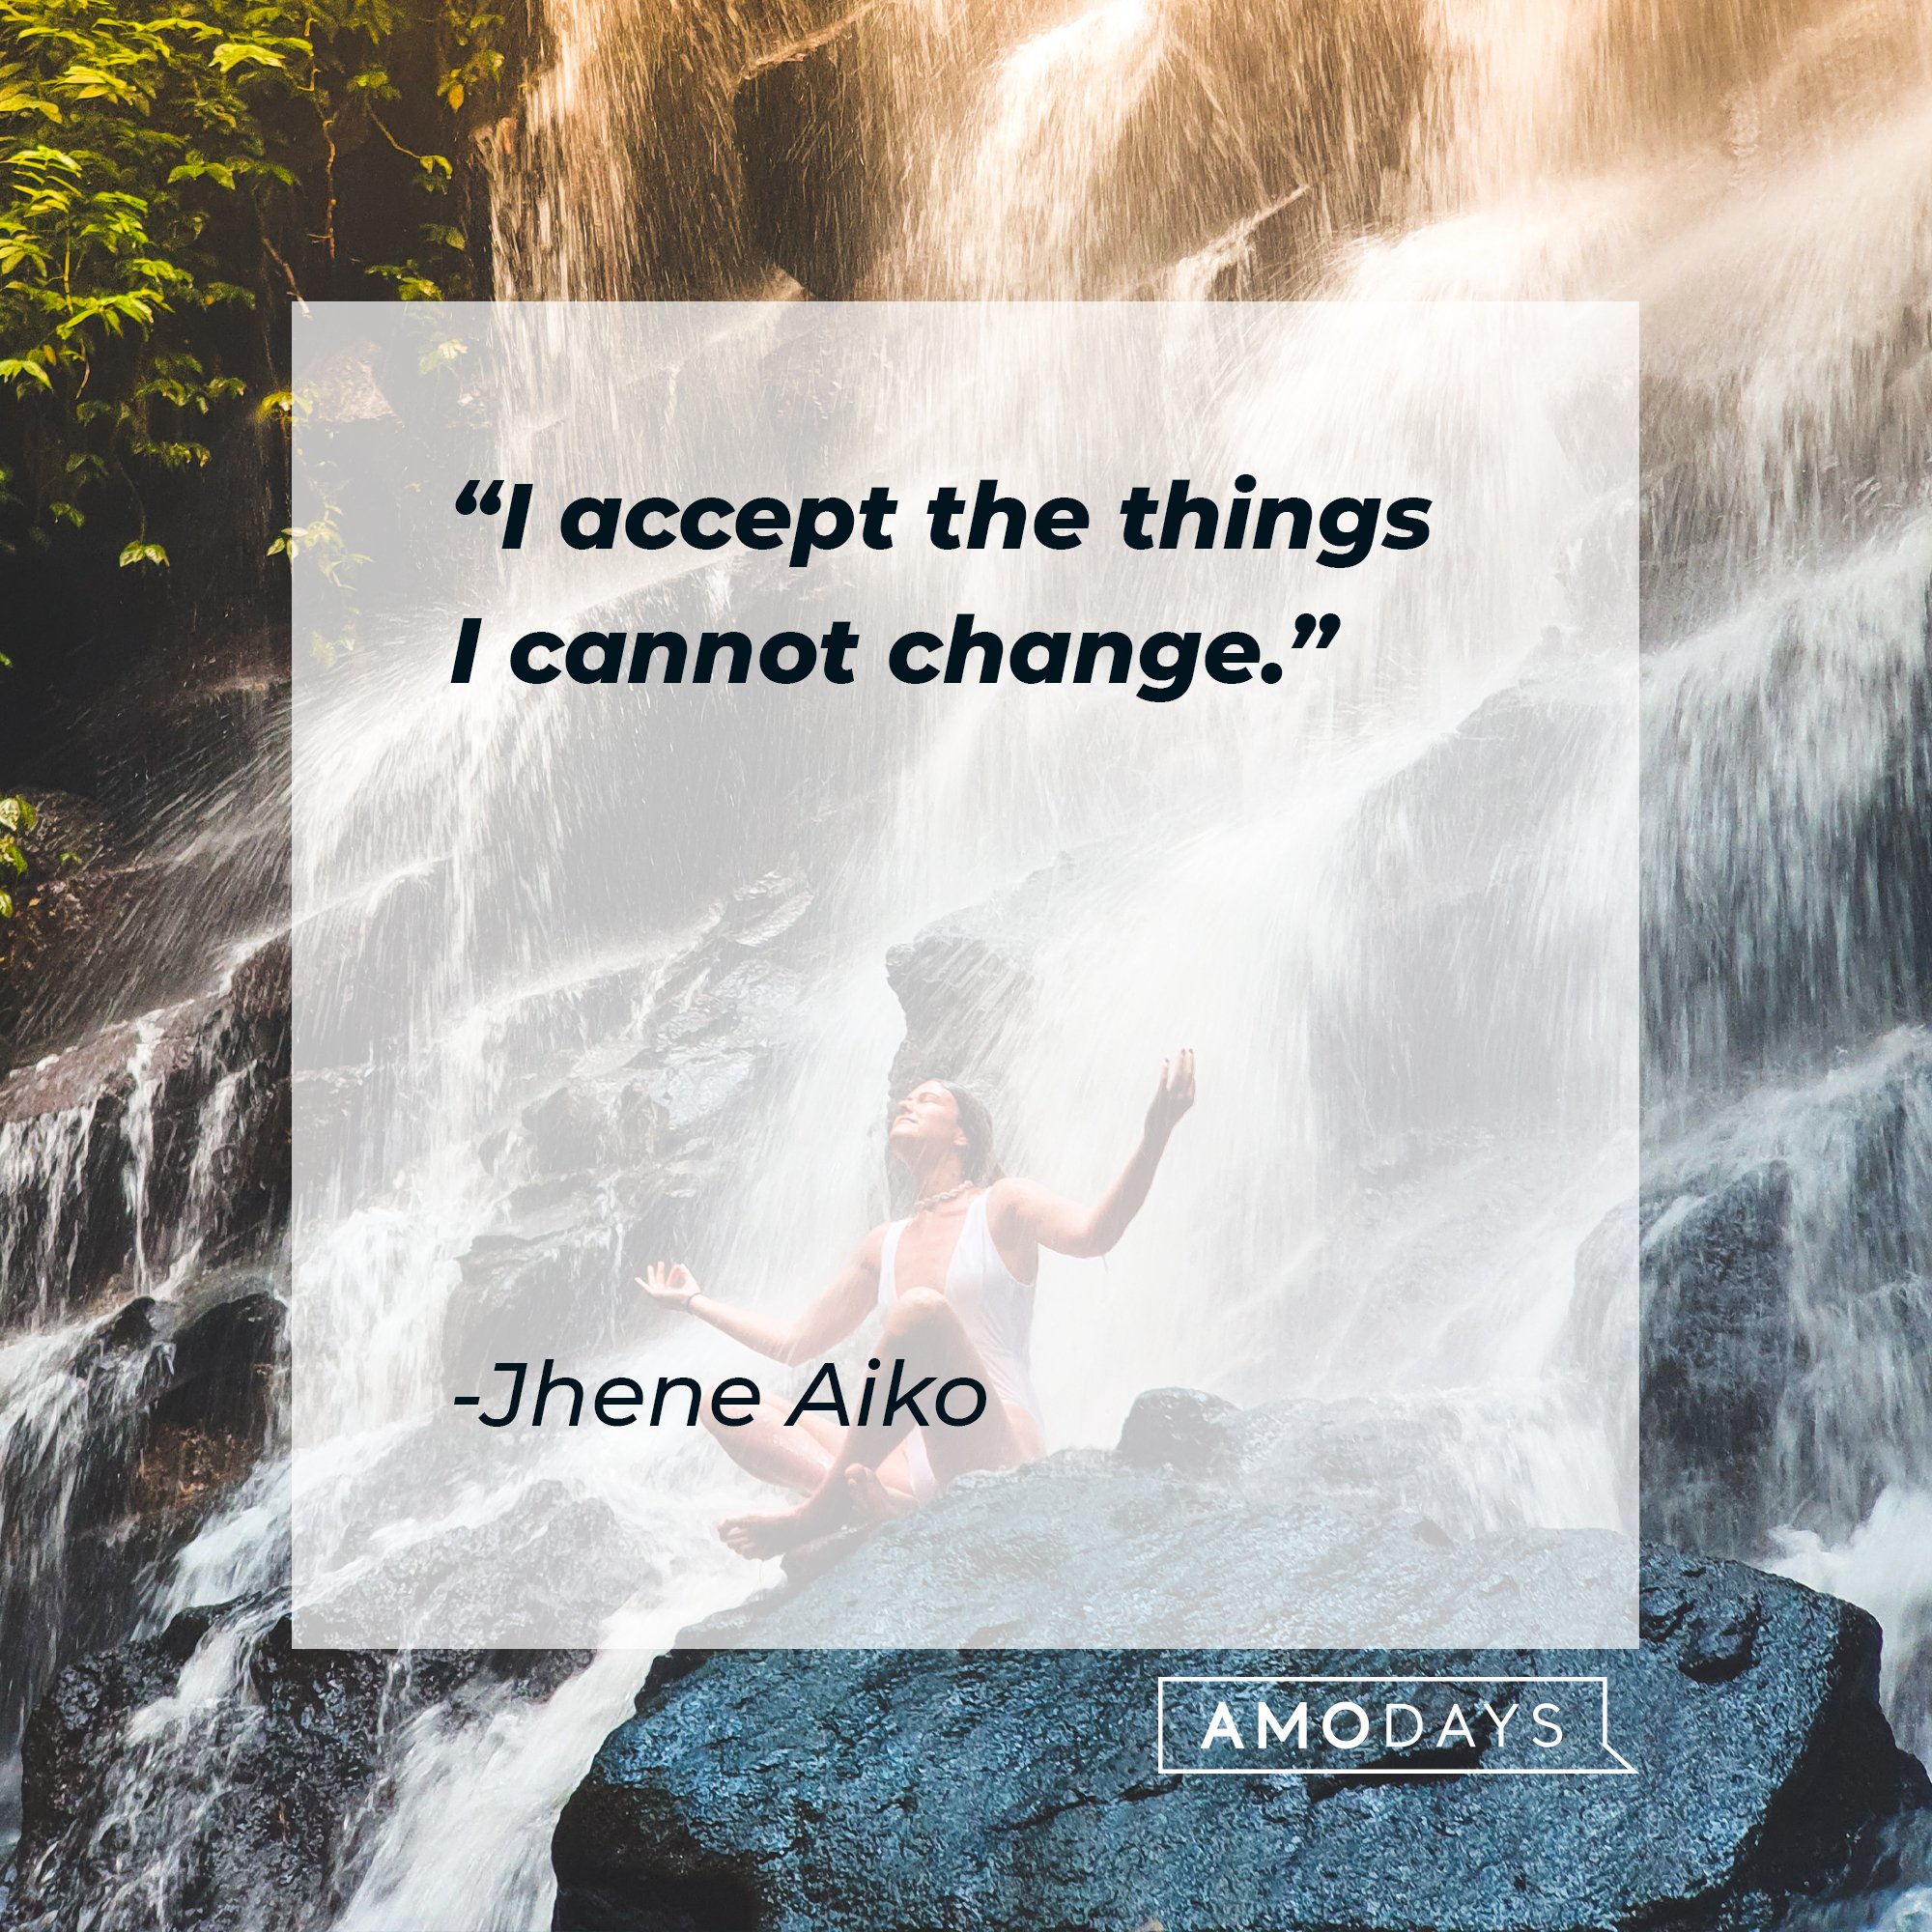  Jhene Aiko‘s quote: "I accept the things I cannot change." | Image: AmoDays